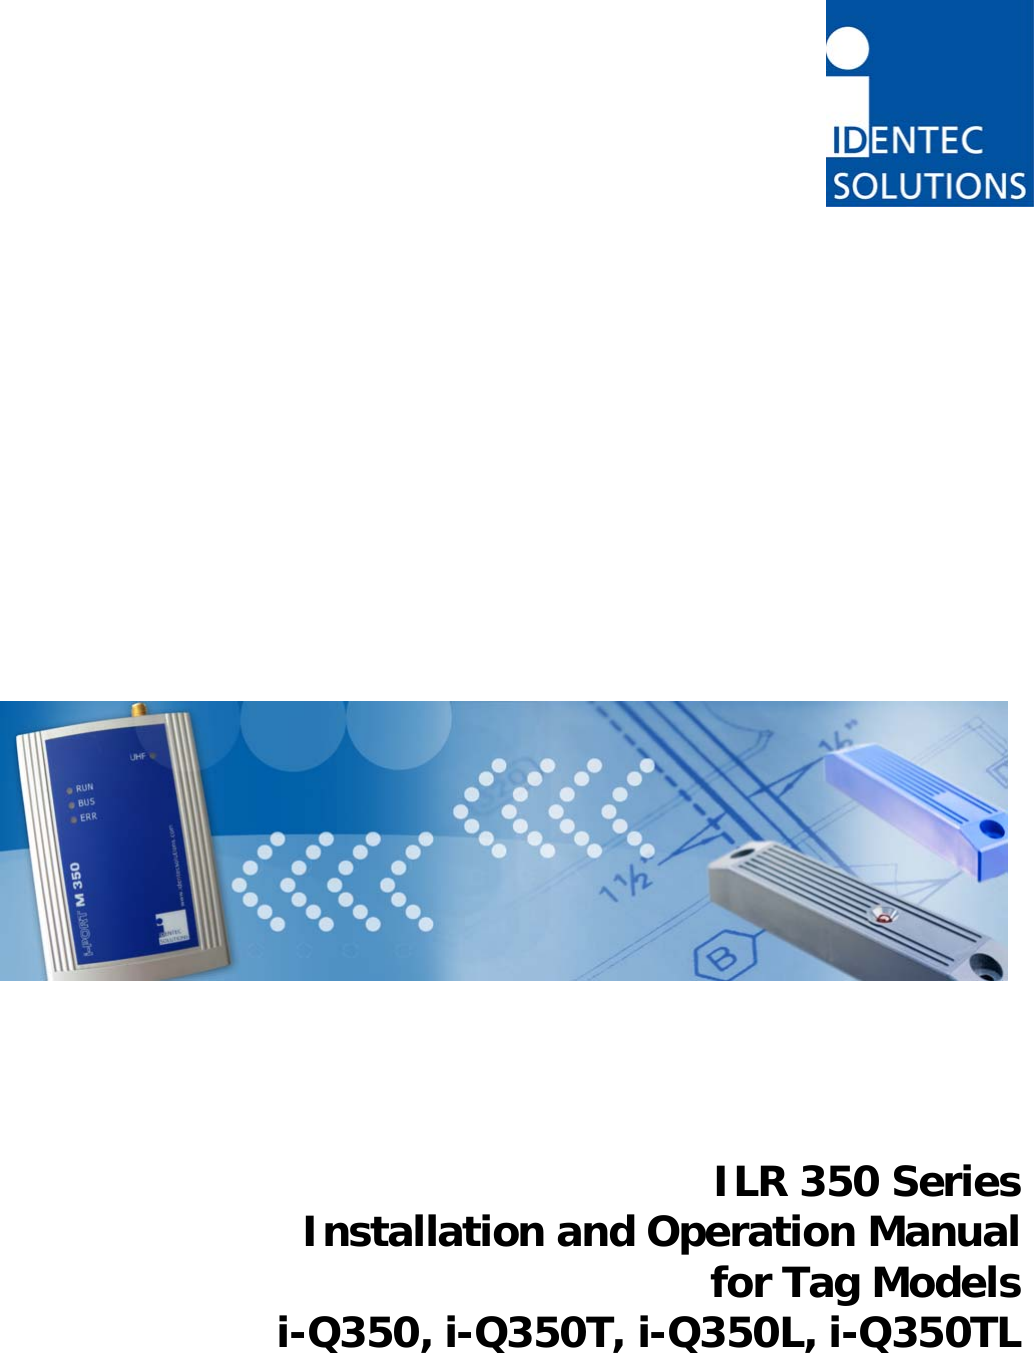                          ILR 350 Series Installation and Operation Manual  for Tag Models  i-Q350, i-Q350T, i-Q350L, i-Q350TL 